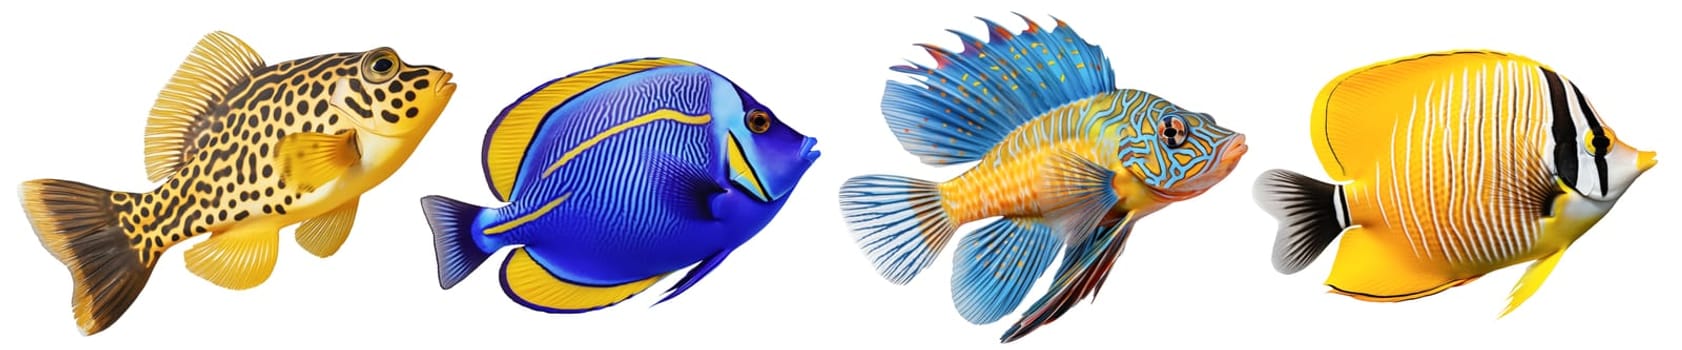 Multicolored aquarium fishes on a transparent background, side view. The Butterflyfish, Chameleonfish, Boxfish, Blue Tang saltwater aquarium fish, isolated on a white background.